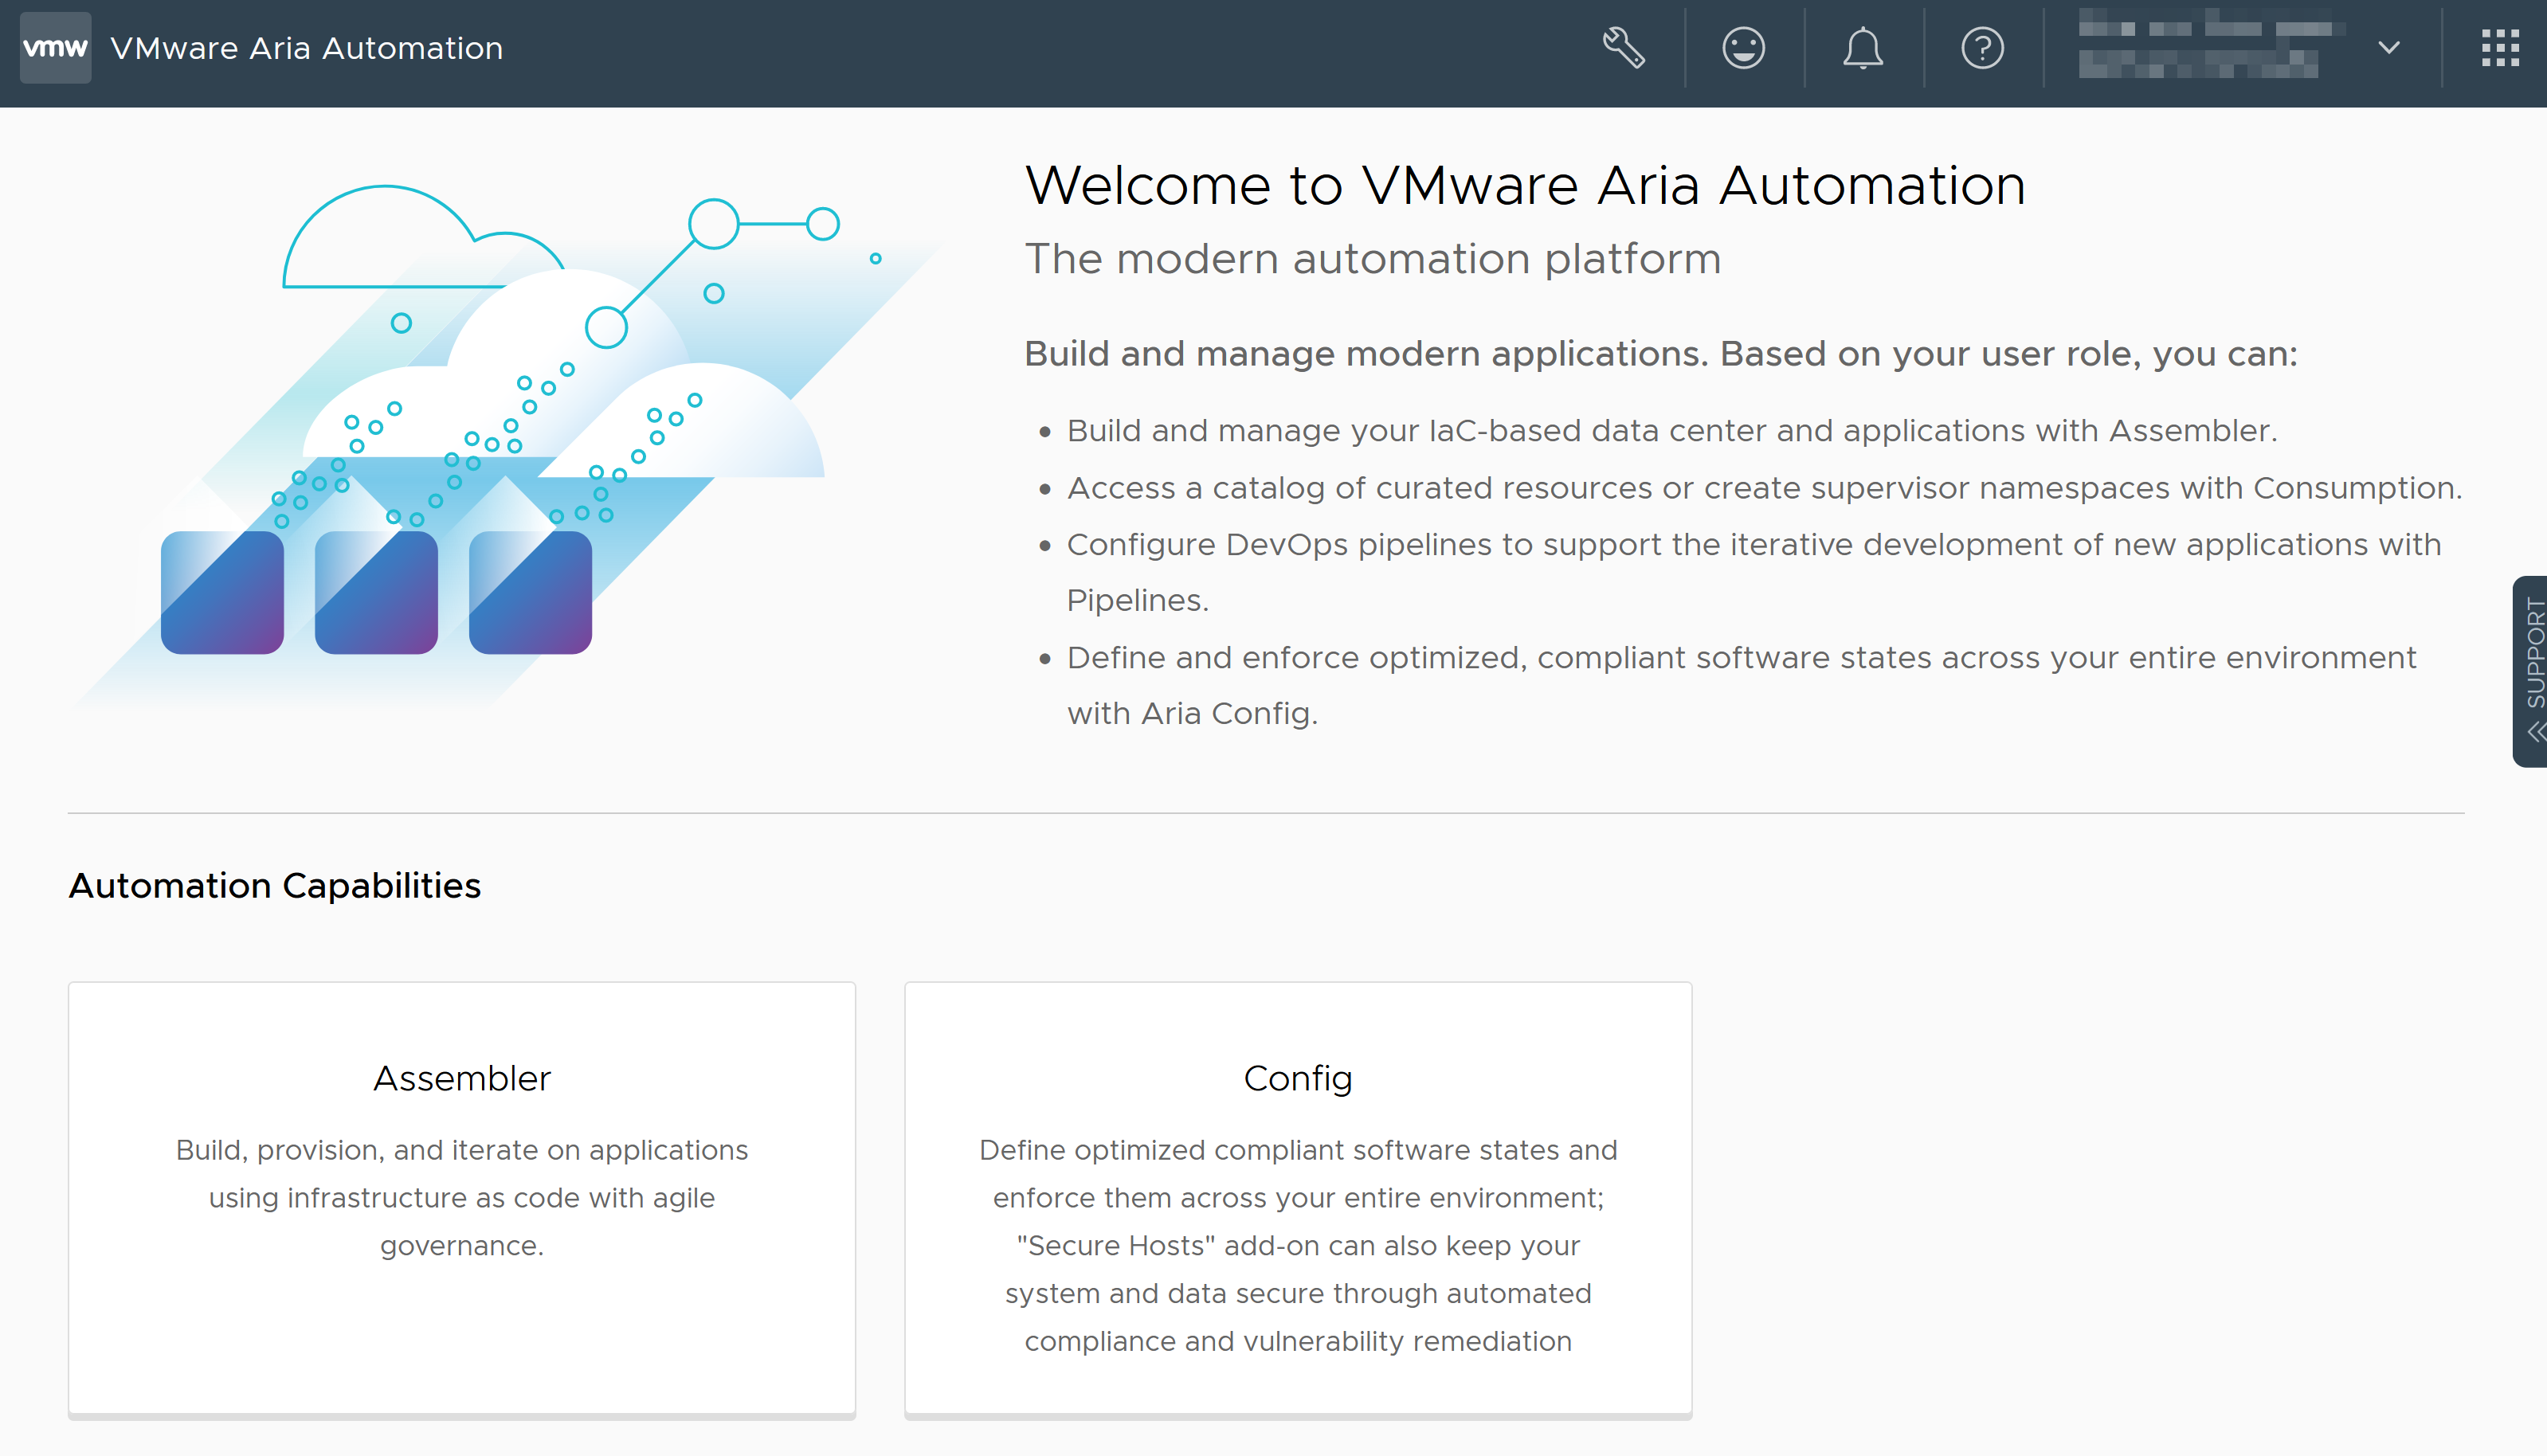 The VMware Aria Automation landing page